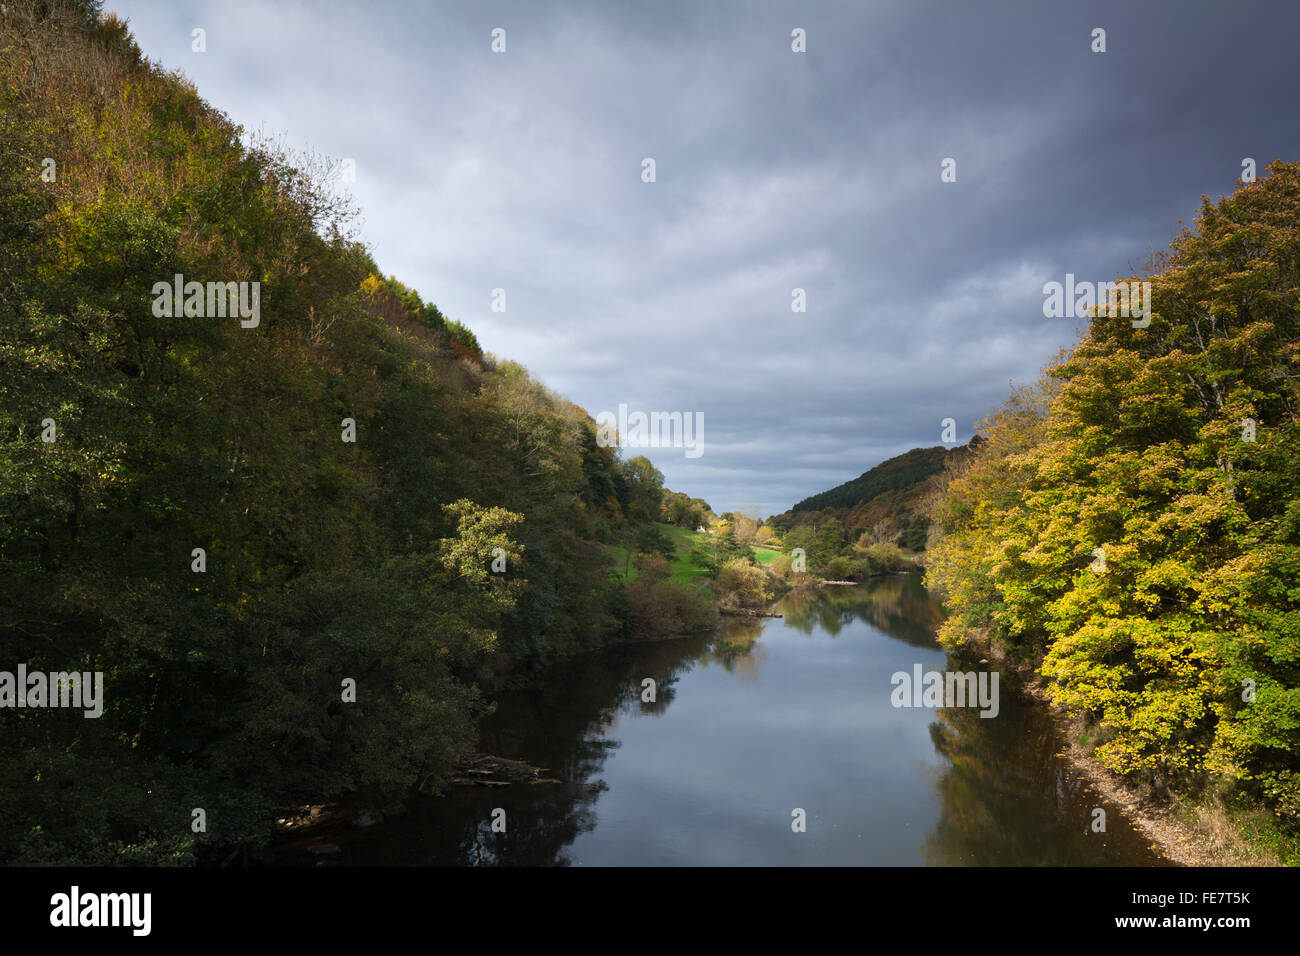 Above the River Wye in autumn on the old railway crossing at Redbrook near Monmouth in the lower Wye Valley, Monmouthshire, Wales. Stock Photo